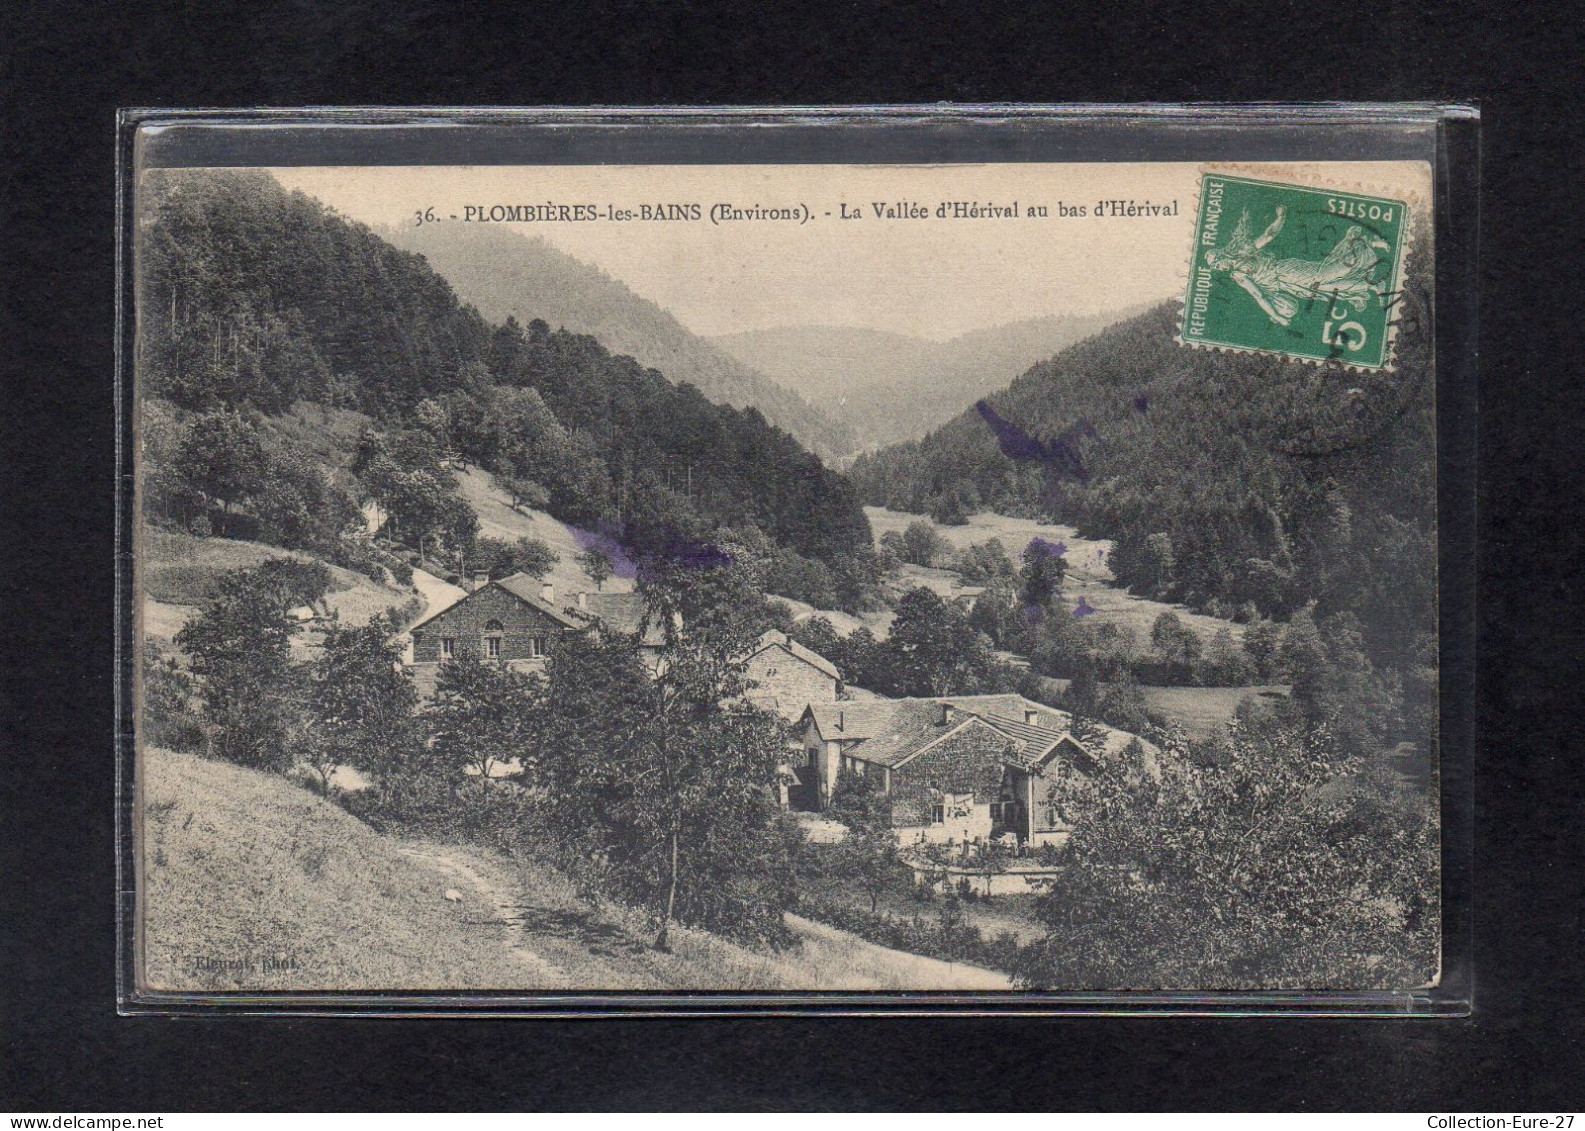 (31/03/24) 88-CPA PLOMBIERES LES BAINS - HERIVAL - Plombieres Les Bains